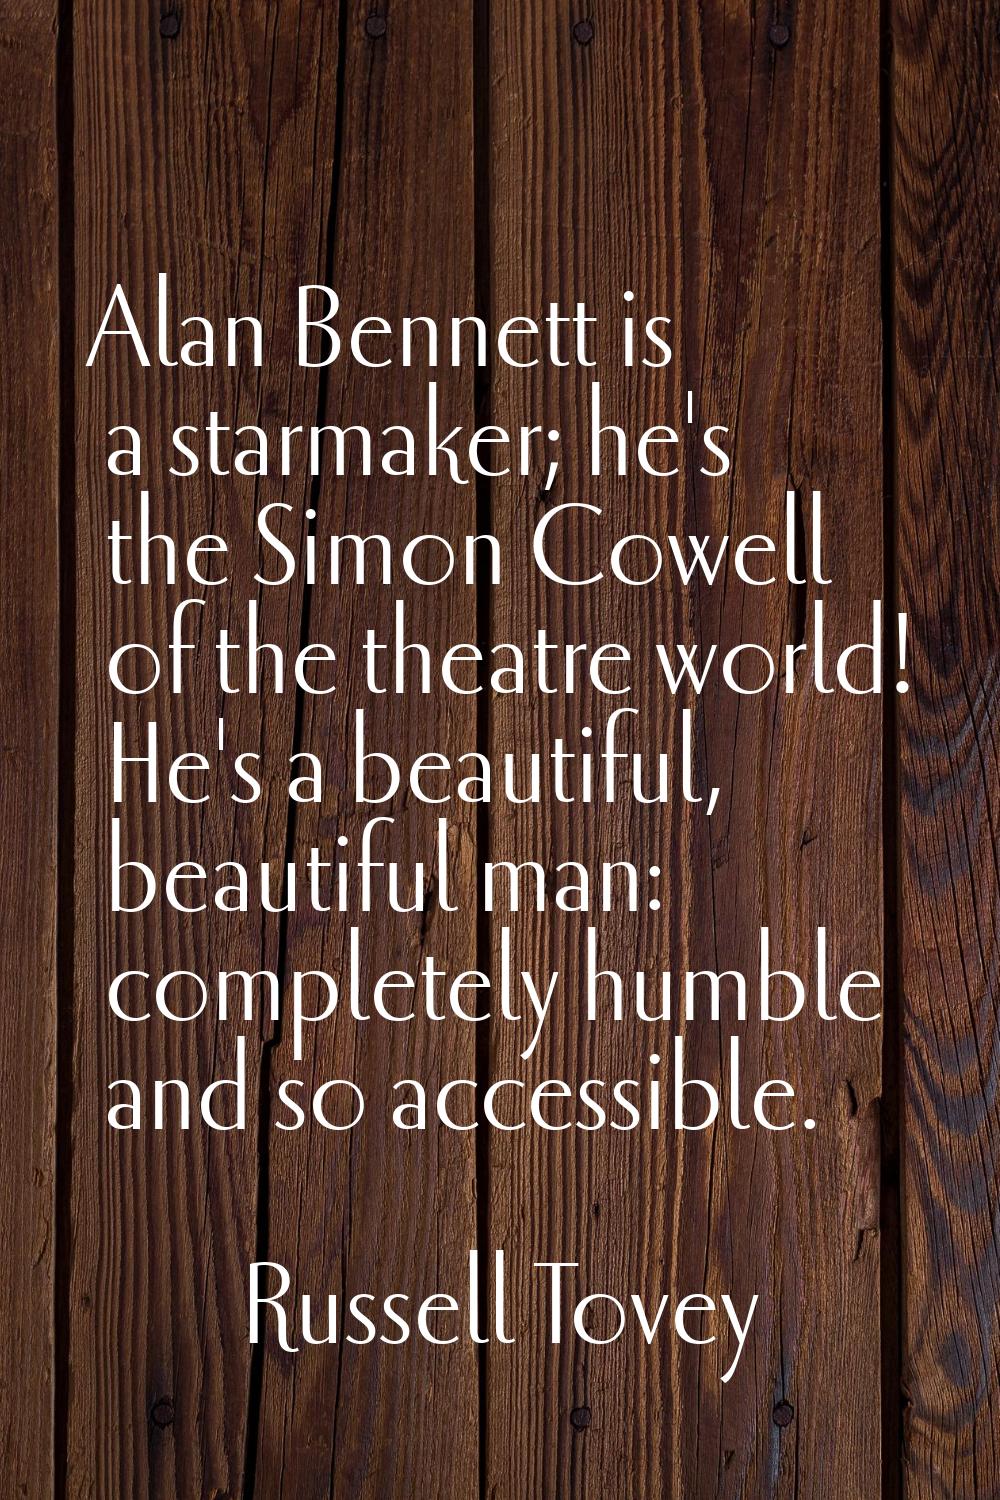 Alan Bennett is a starmaker; he's the Simon Cowell of the theatre world! He's a beautiful, beautifu